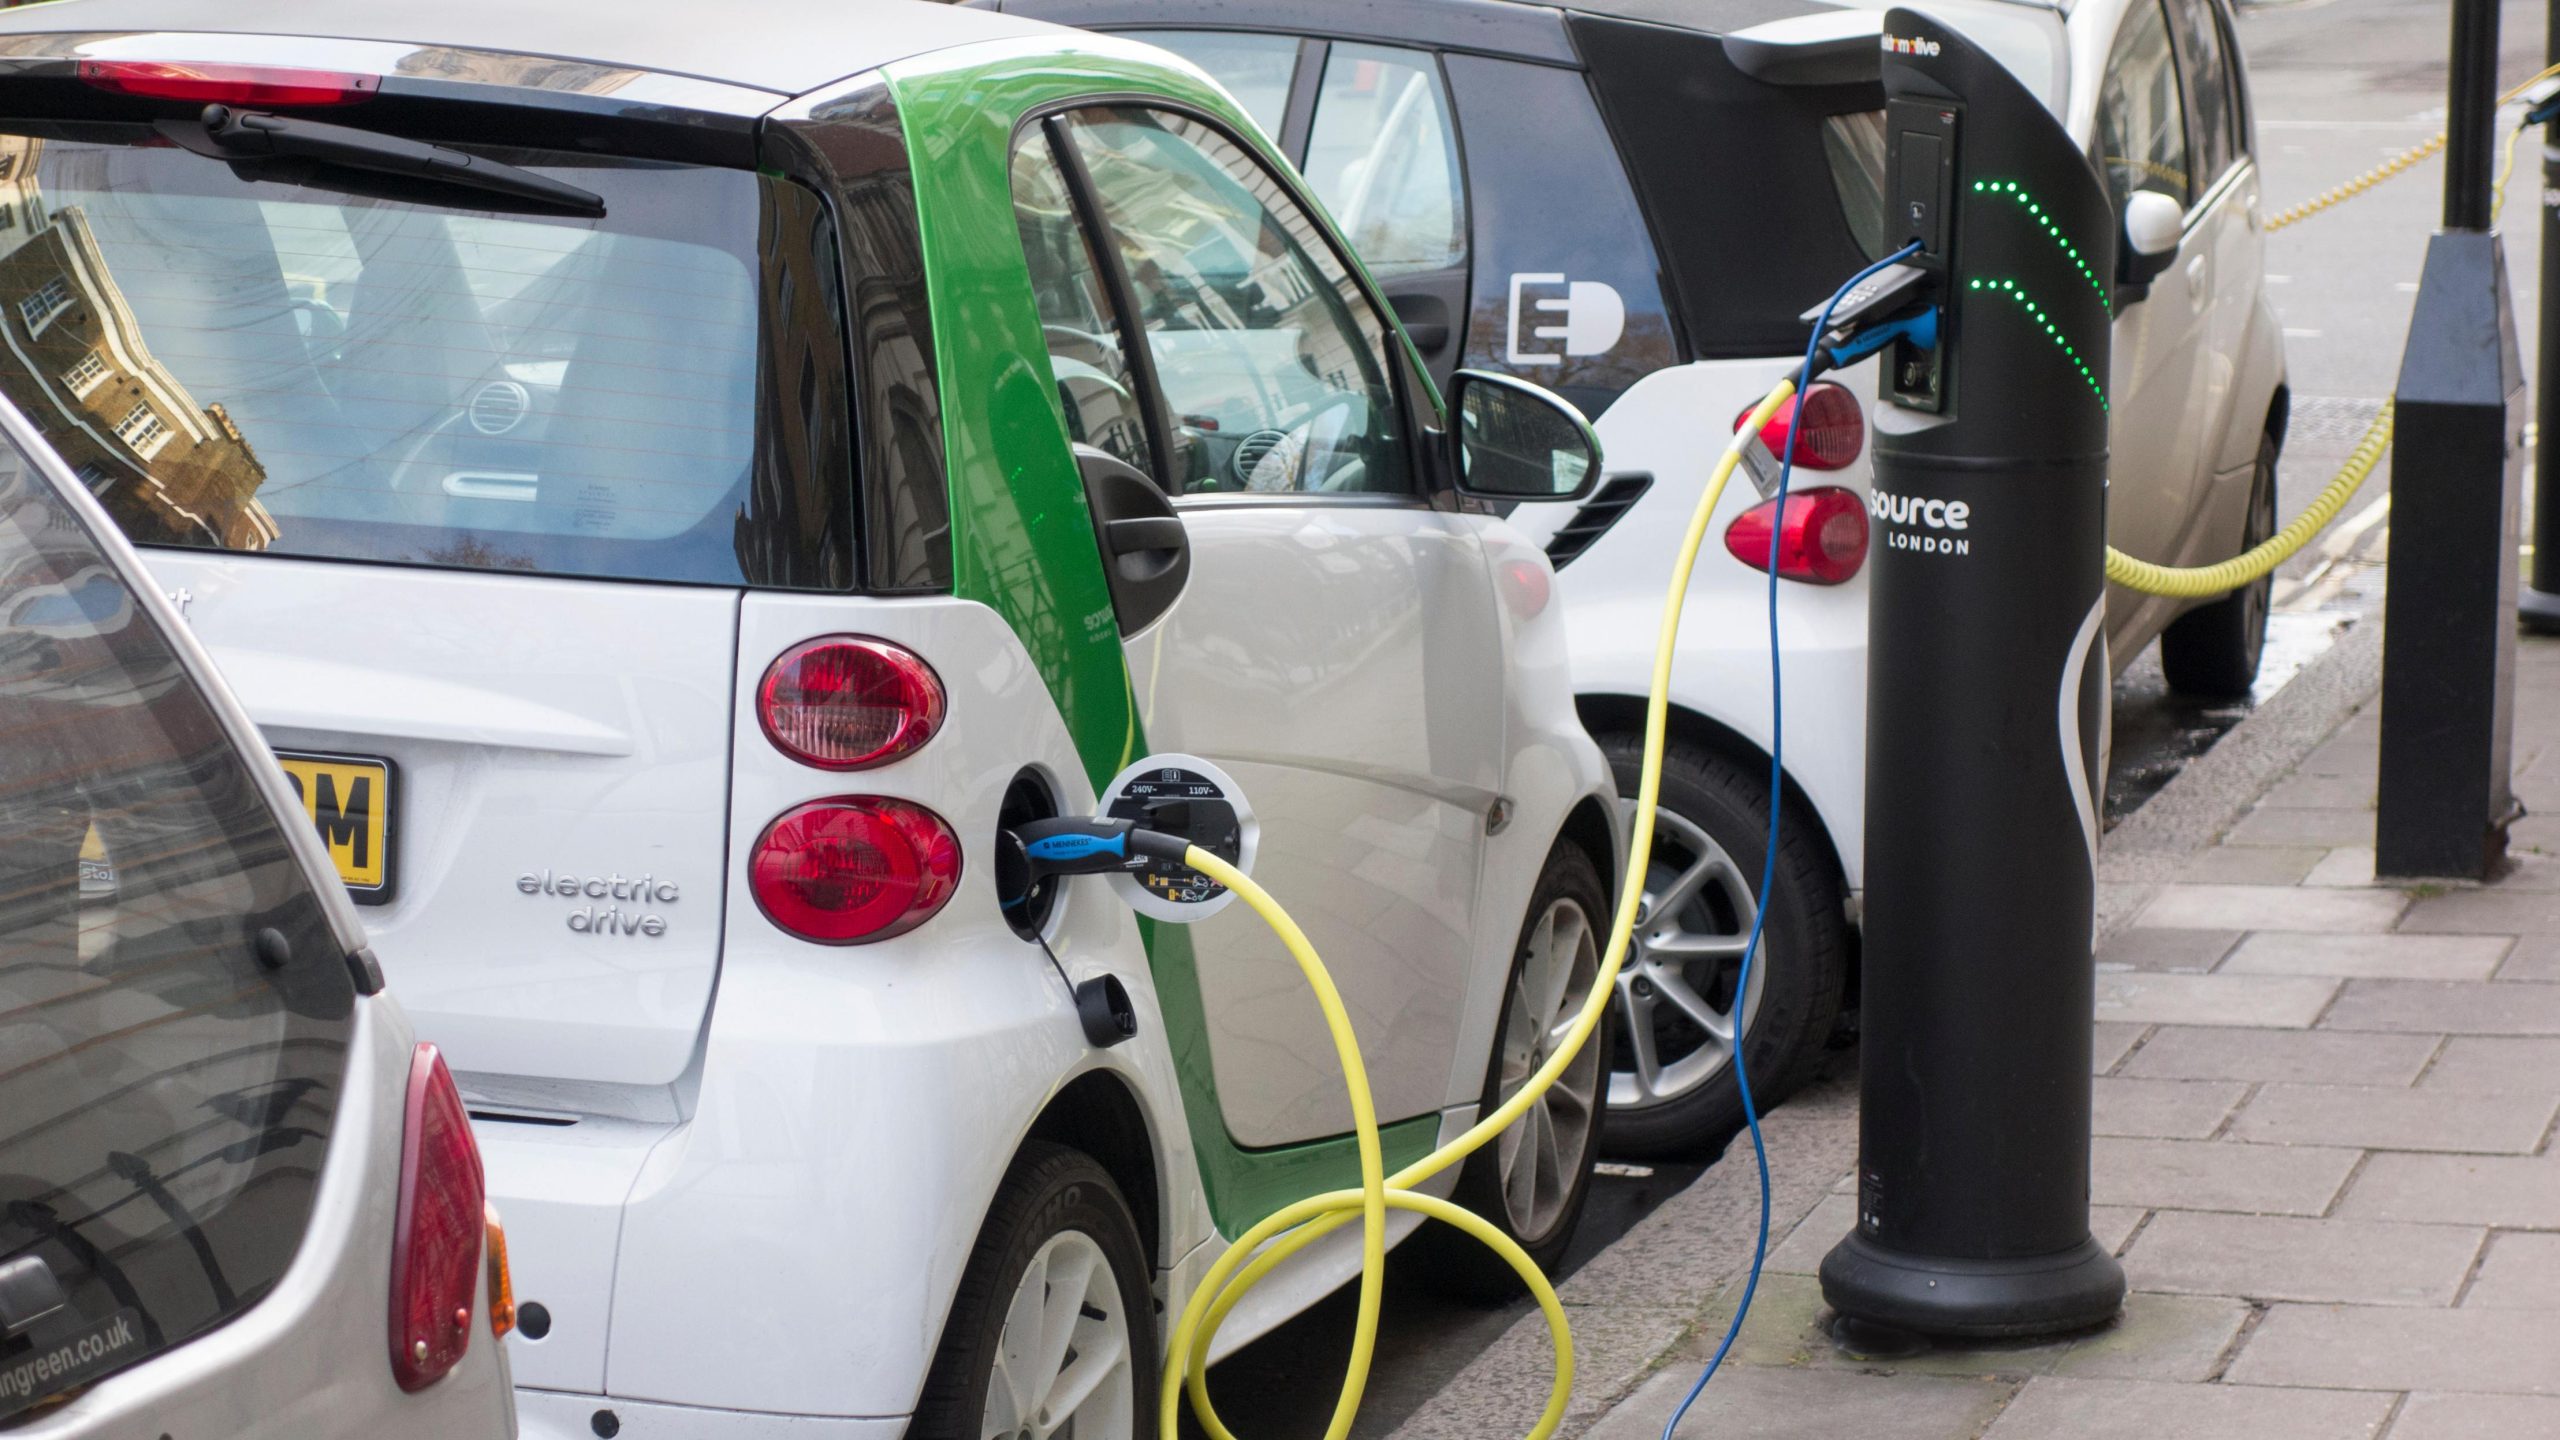 Kenyan Gov't saves US$4M from Fuel Importation on electric vehicles (EVs) in the country